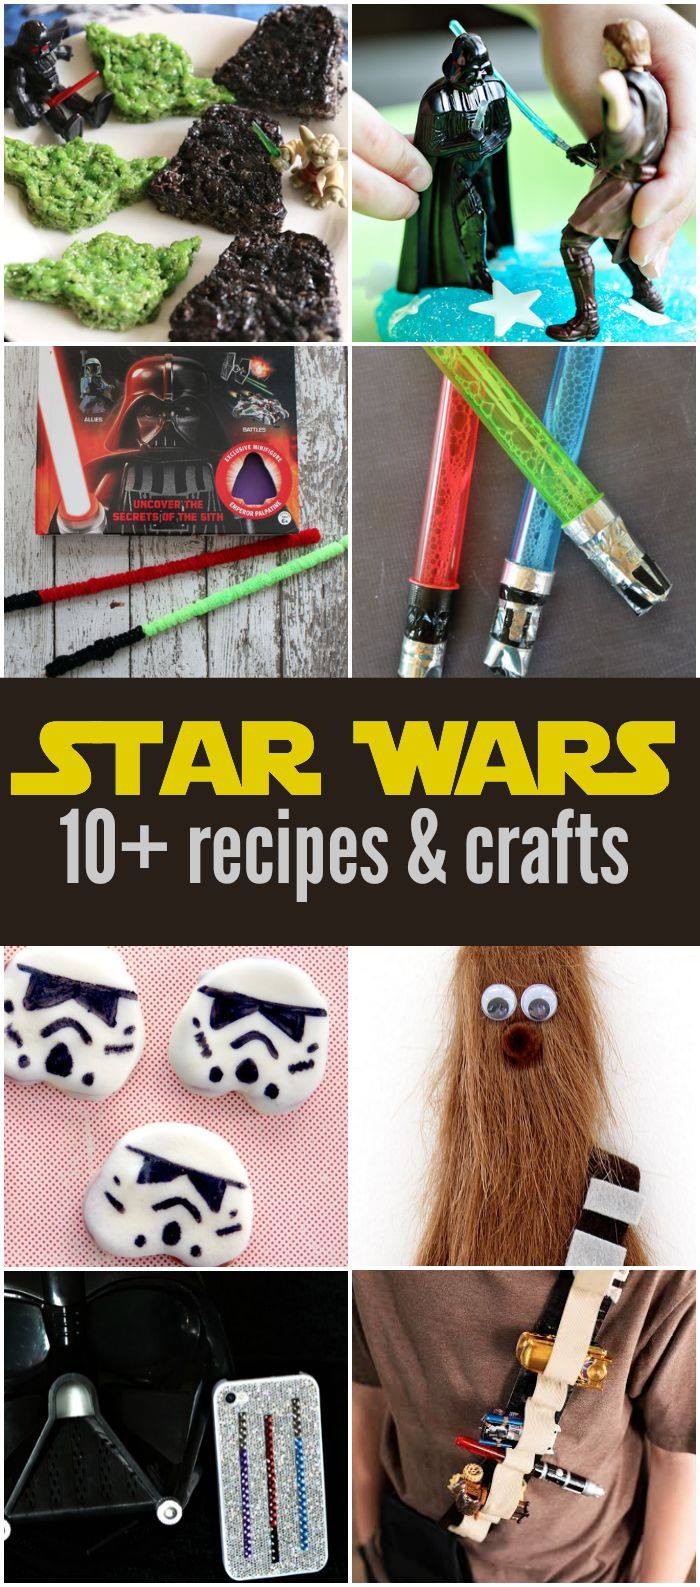 So many fun Star Wars Recipes and Crafts - perfect for #ForceFriday and your Star Wars loving friends!